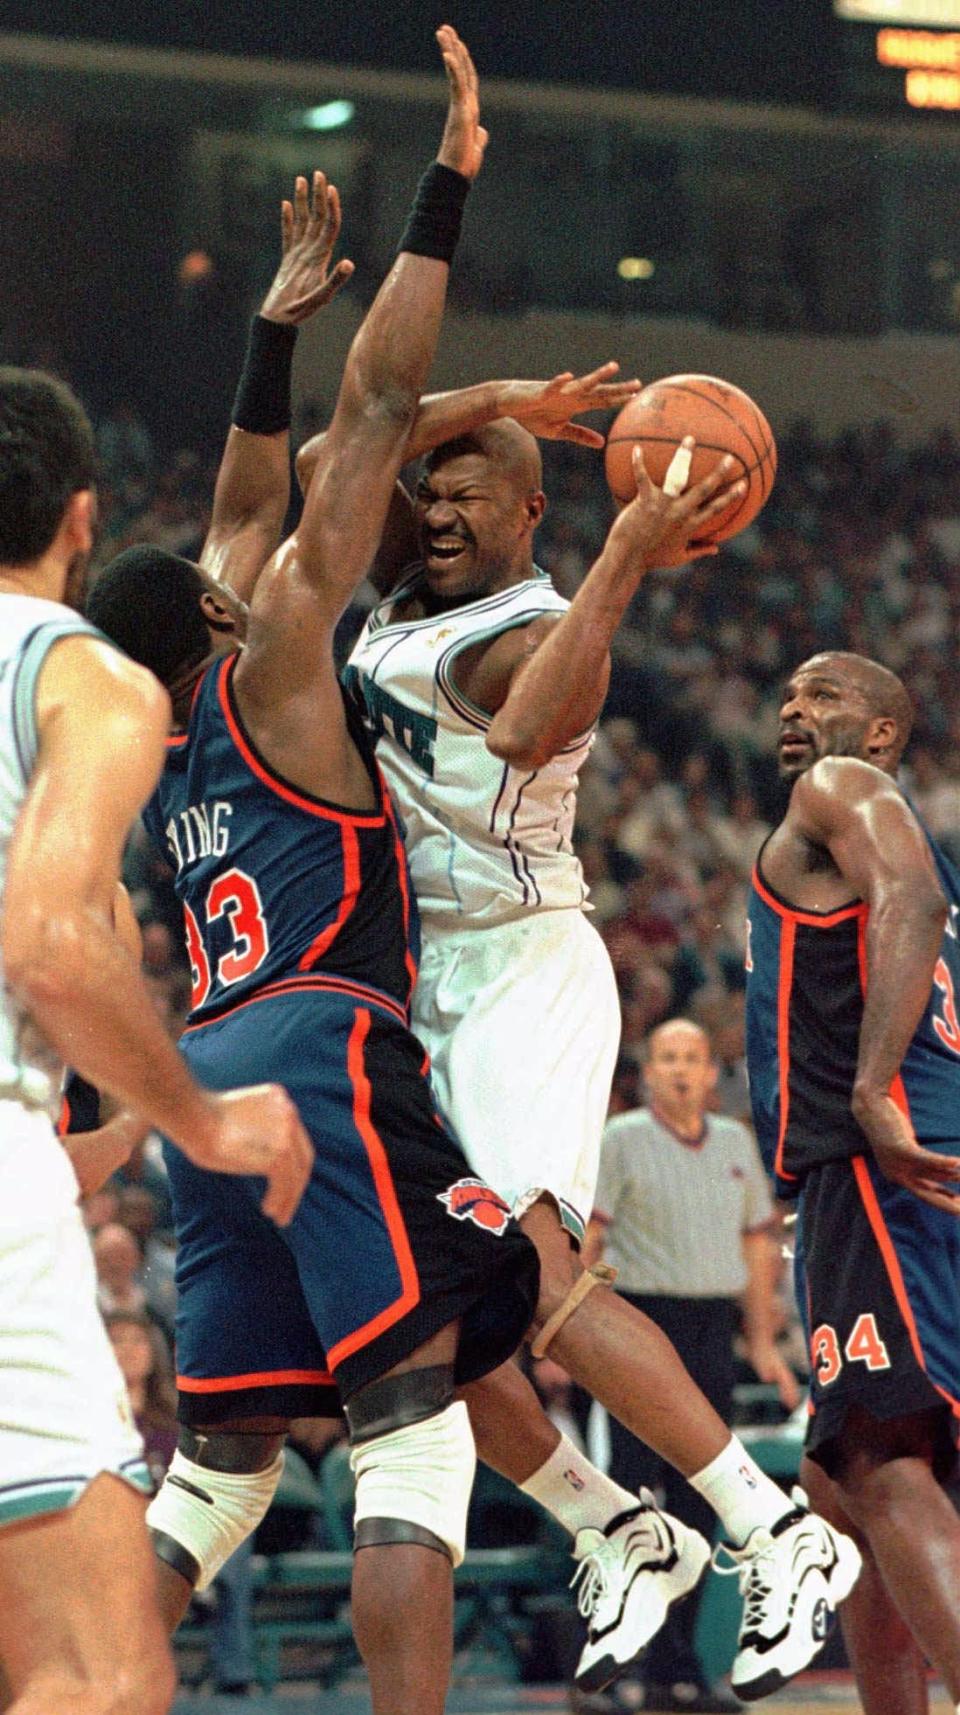 Charlotte Hornets guard Ricky Pierce runs into New York Knicks center Patrick Ewing in 1997. Pierce was drafted No. 18 in the 1982 NBA draft by the Pistons.